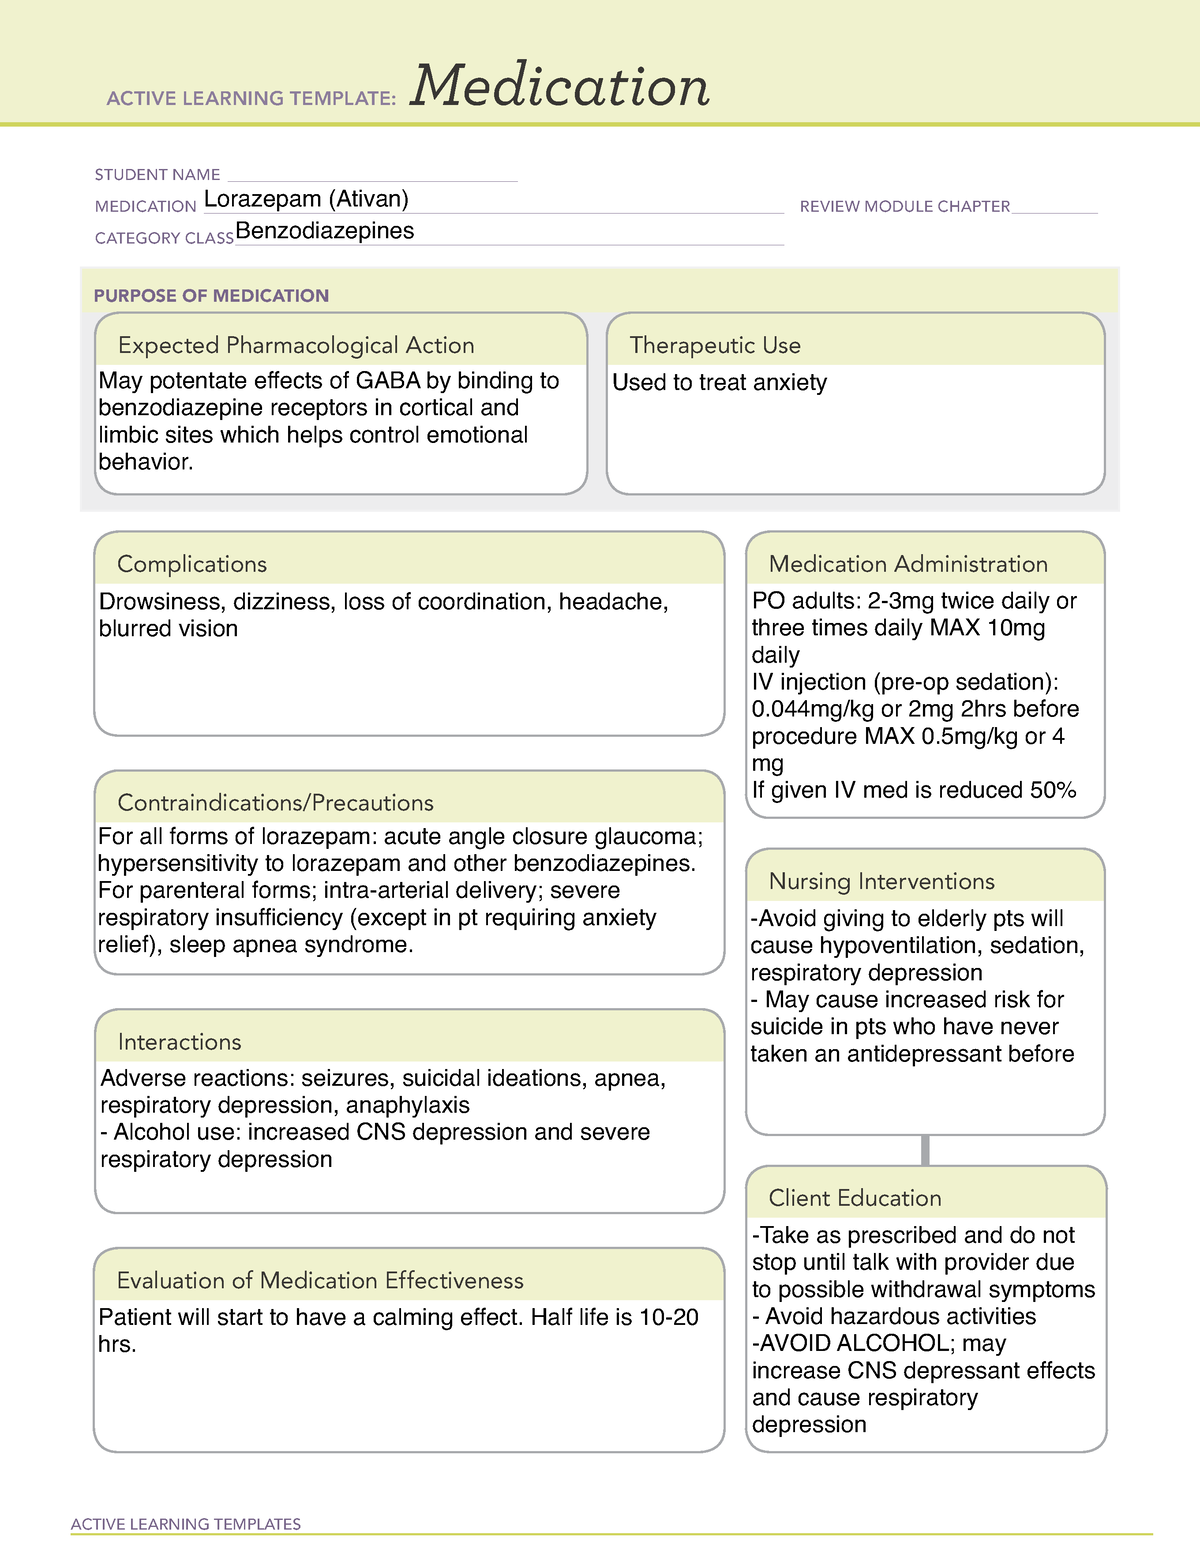 Ati Active Learning Template Medication Lorazepam